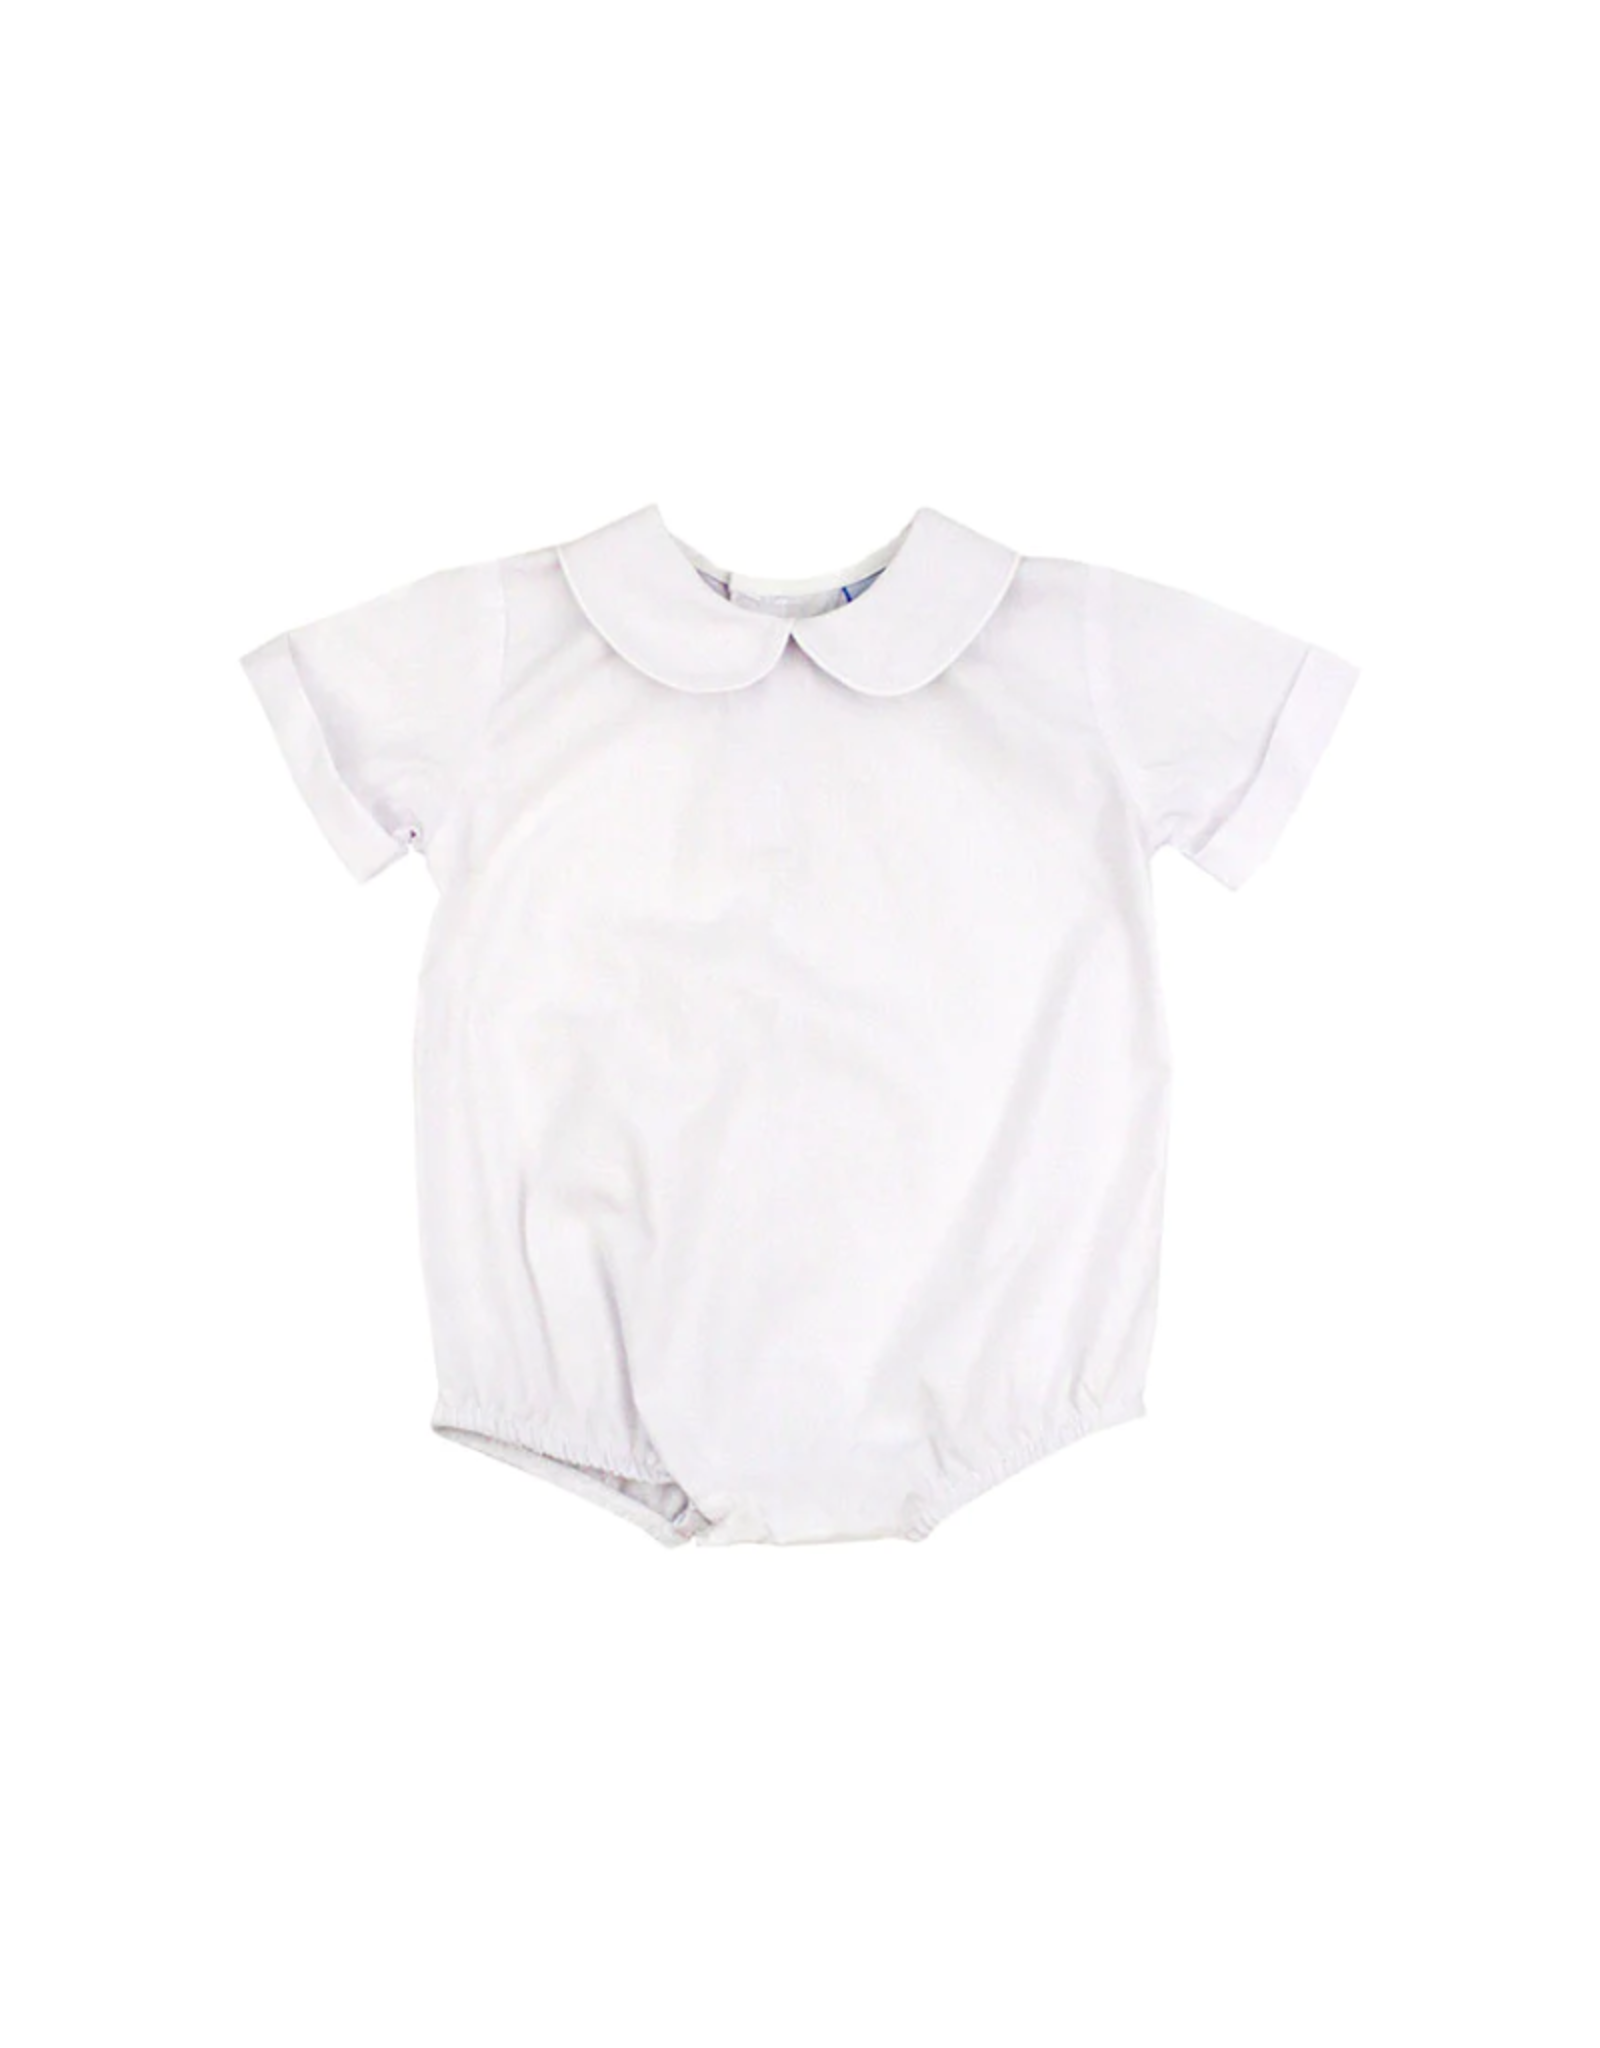 The Bailey Boys White Boys Short Sleeve Piped Onesie w/ Button Back